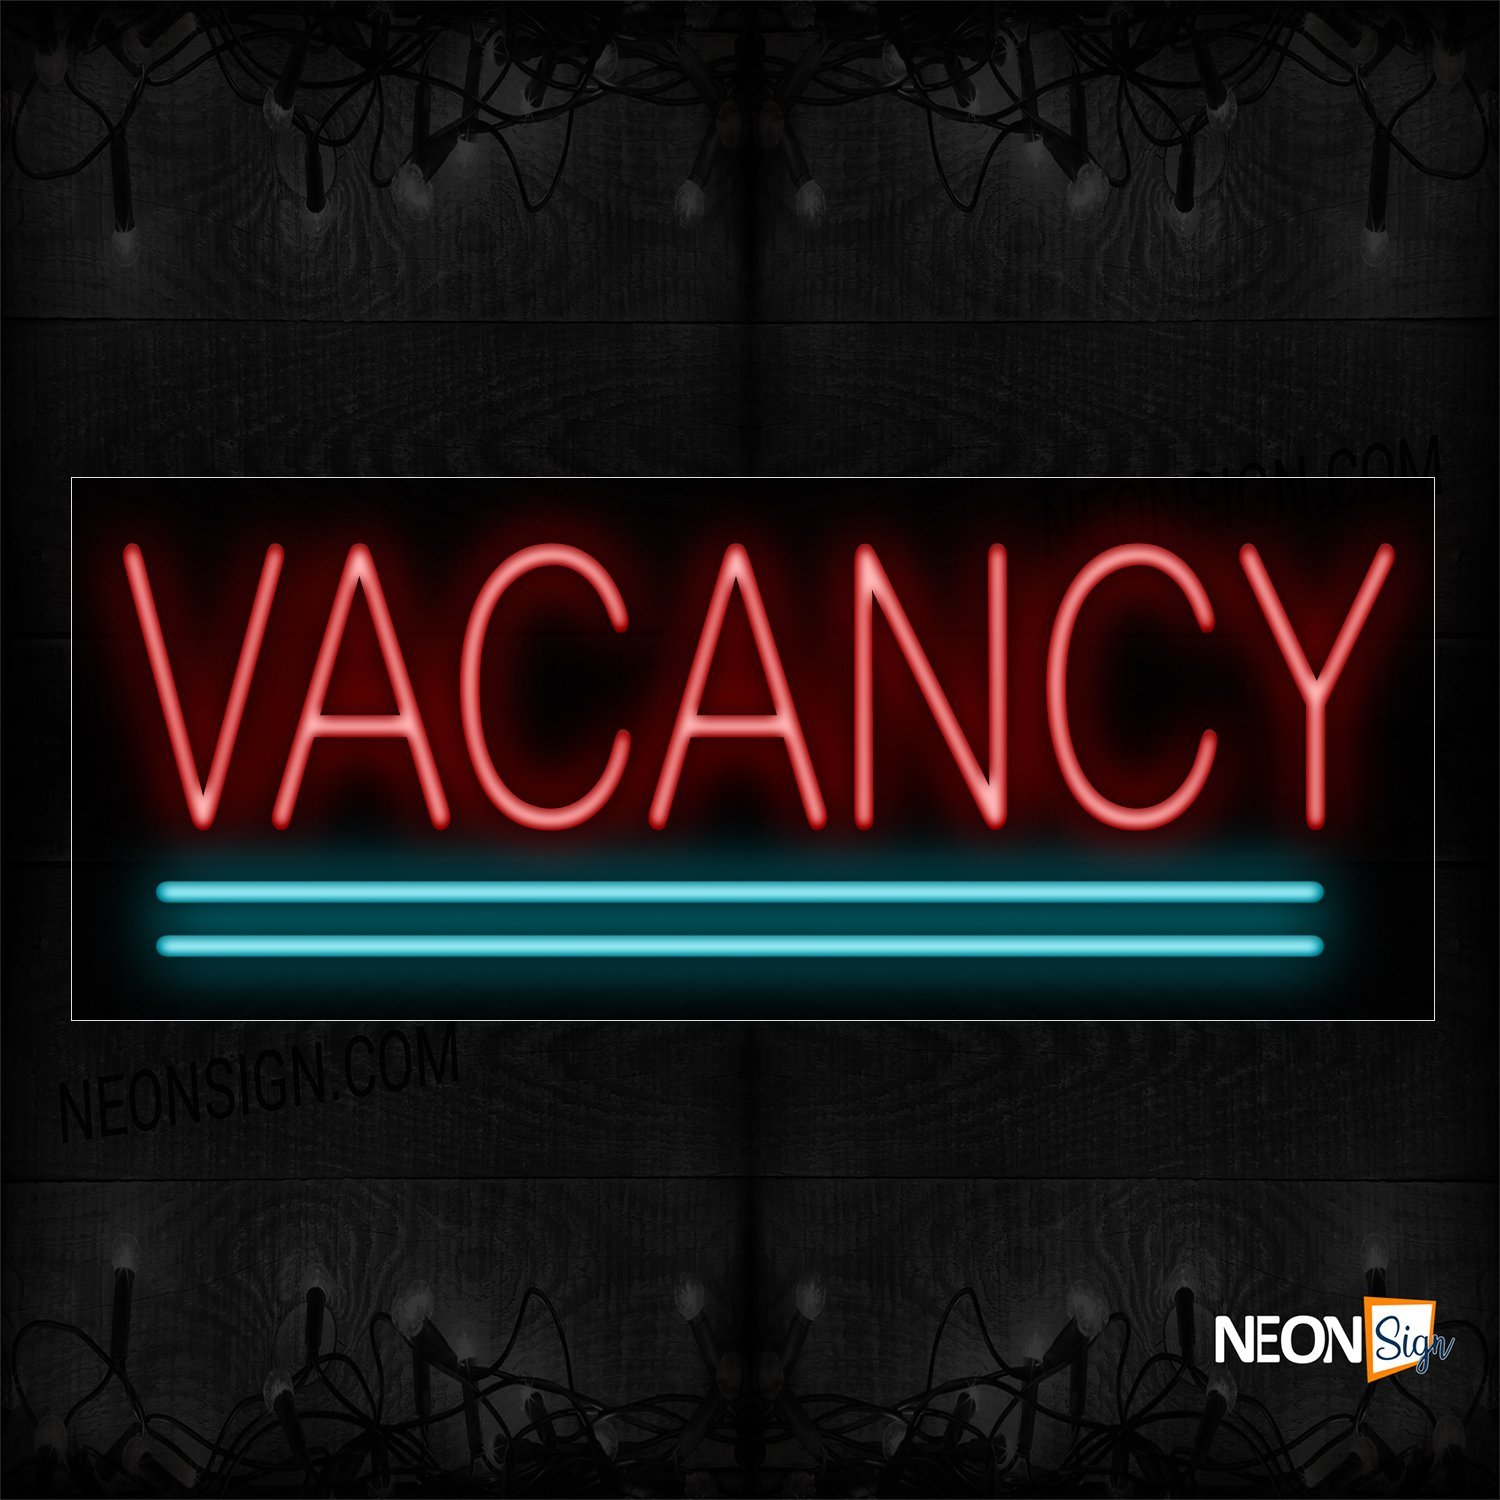 Image of 10142 Vacancy In Red With Aqua Lines Neon Sign_13x32 Black Backing